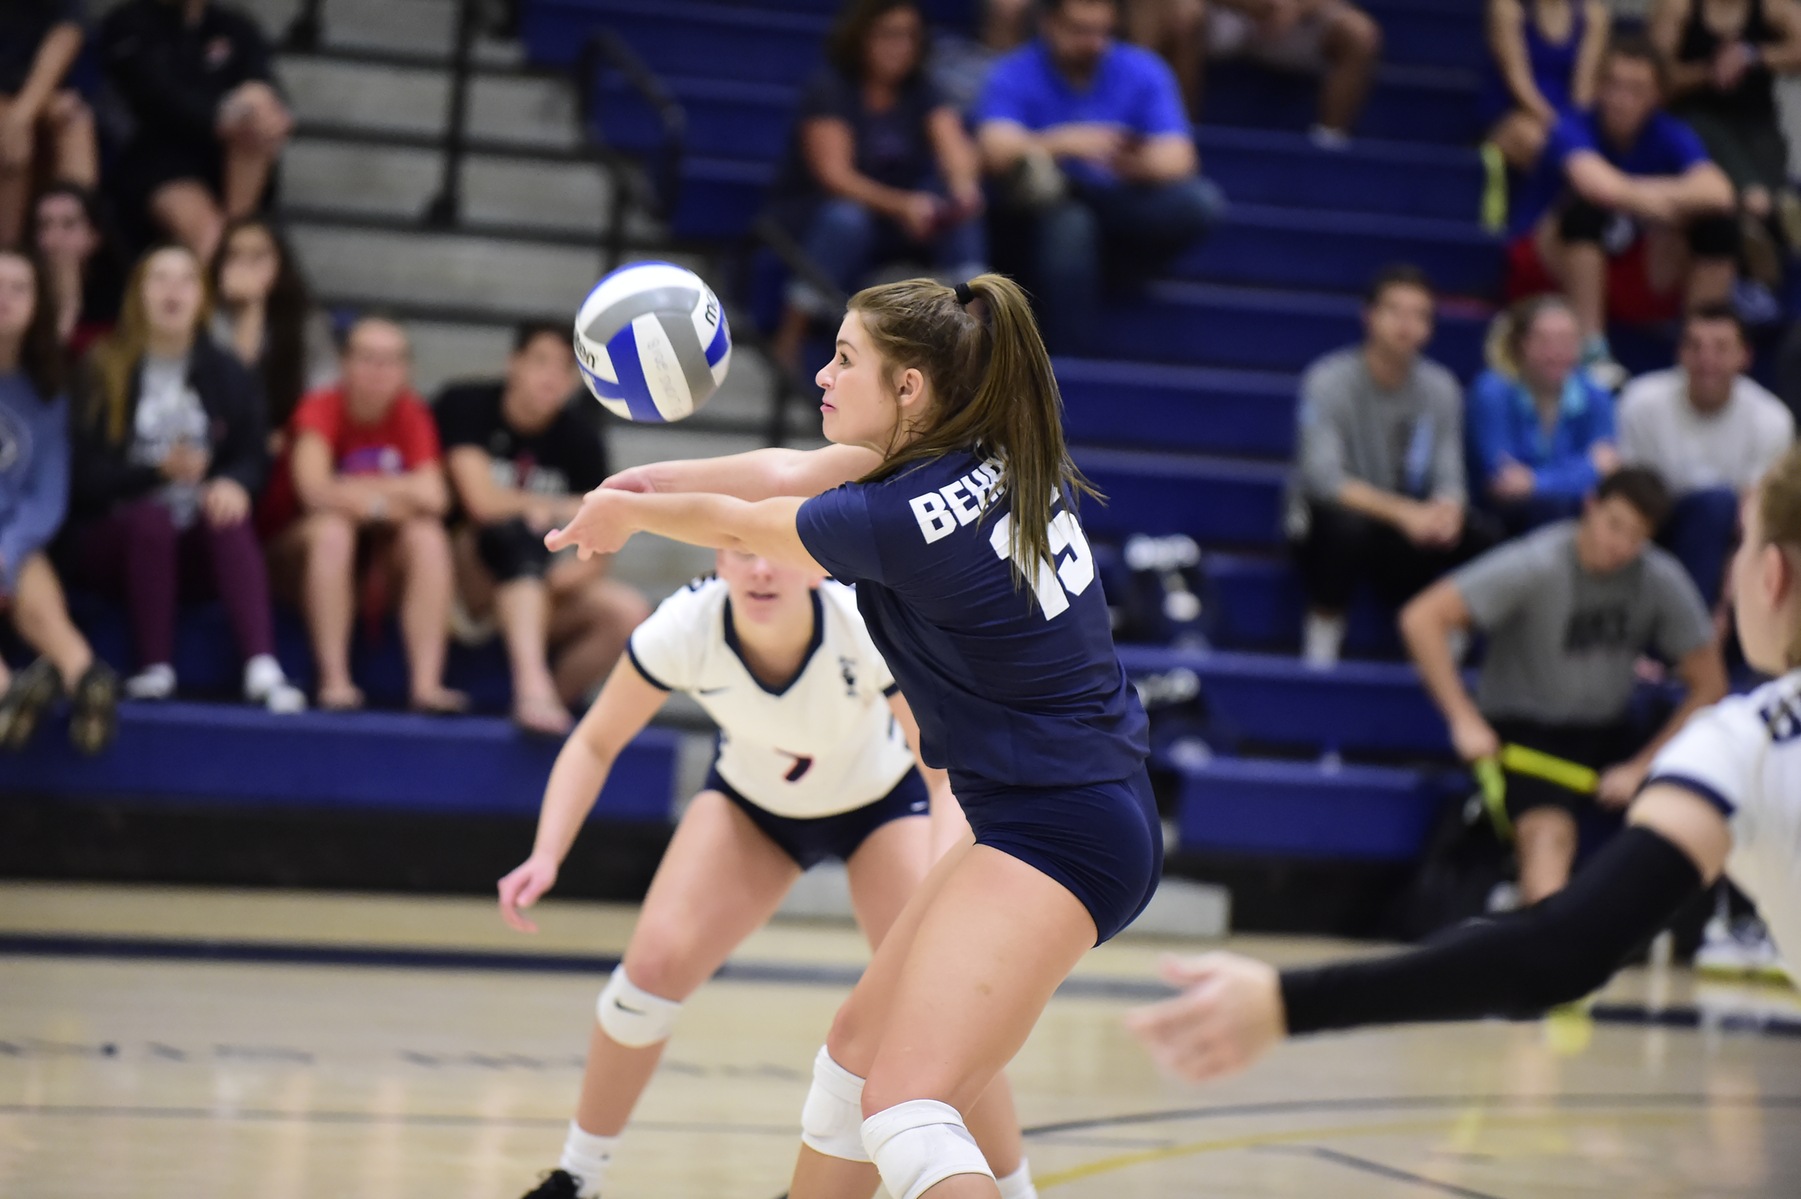 Behrend Volleyball Sweeps DYC in Season Opener